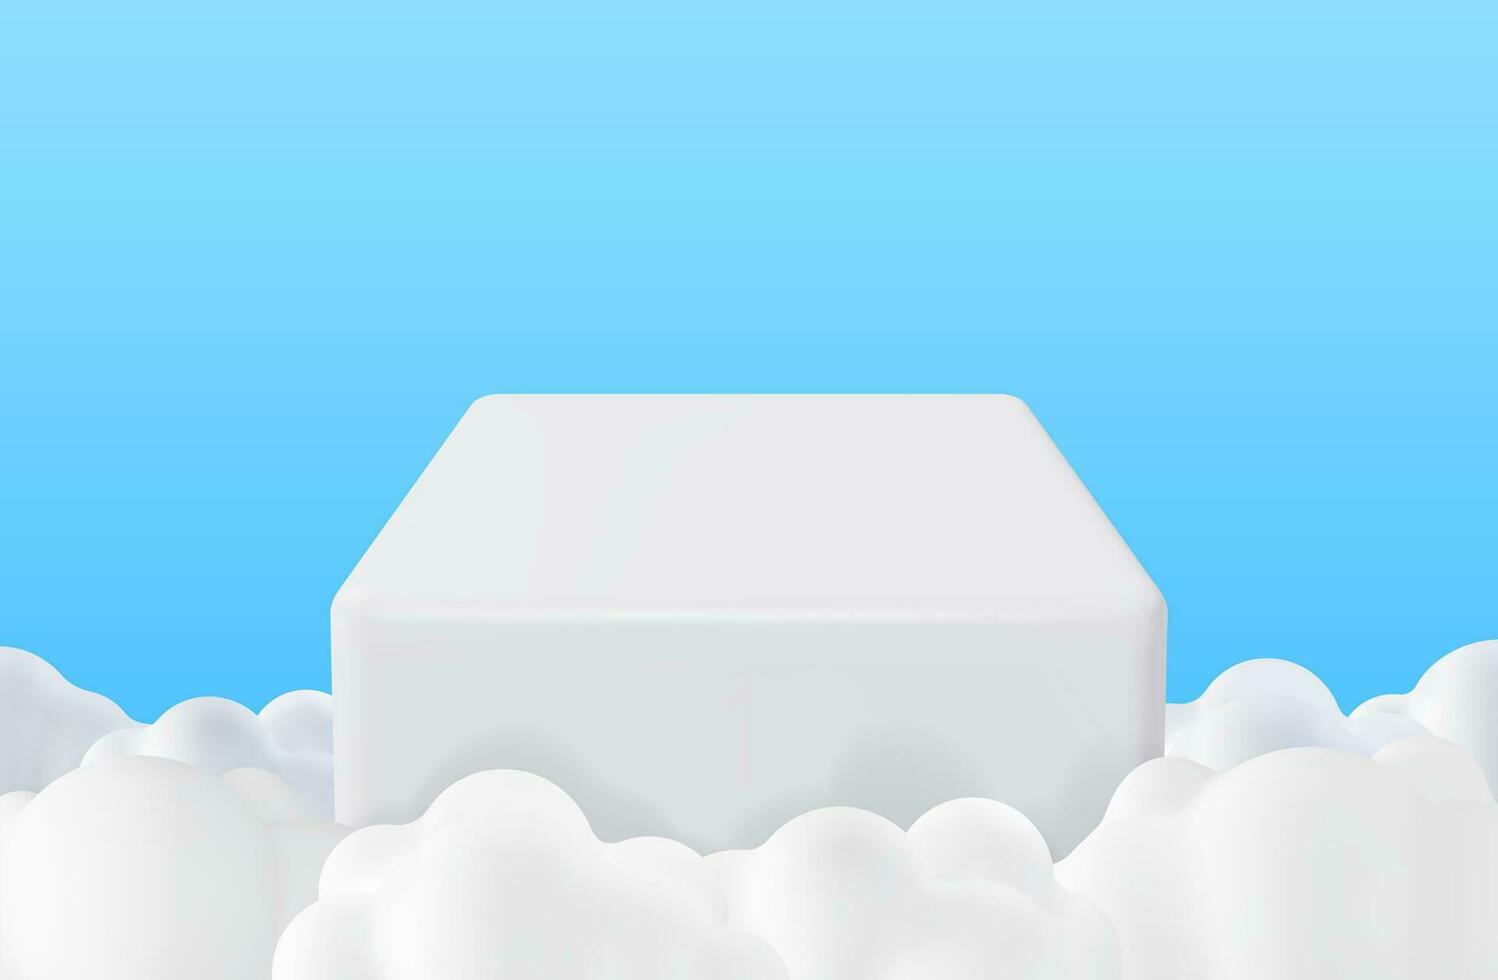 3D White Podium in Fluffy Clouds Background. Render Podium in Cloudy Scene. Abstract Platform in Blue Sky with Cartoon Clouds. Product Display Presentation Advertisement. Realistic Vector Illustration